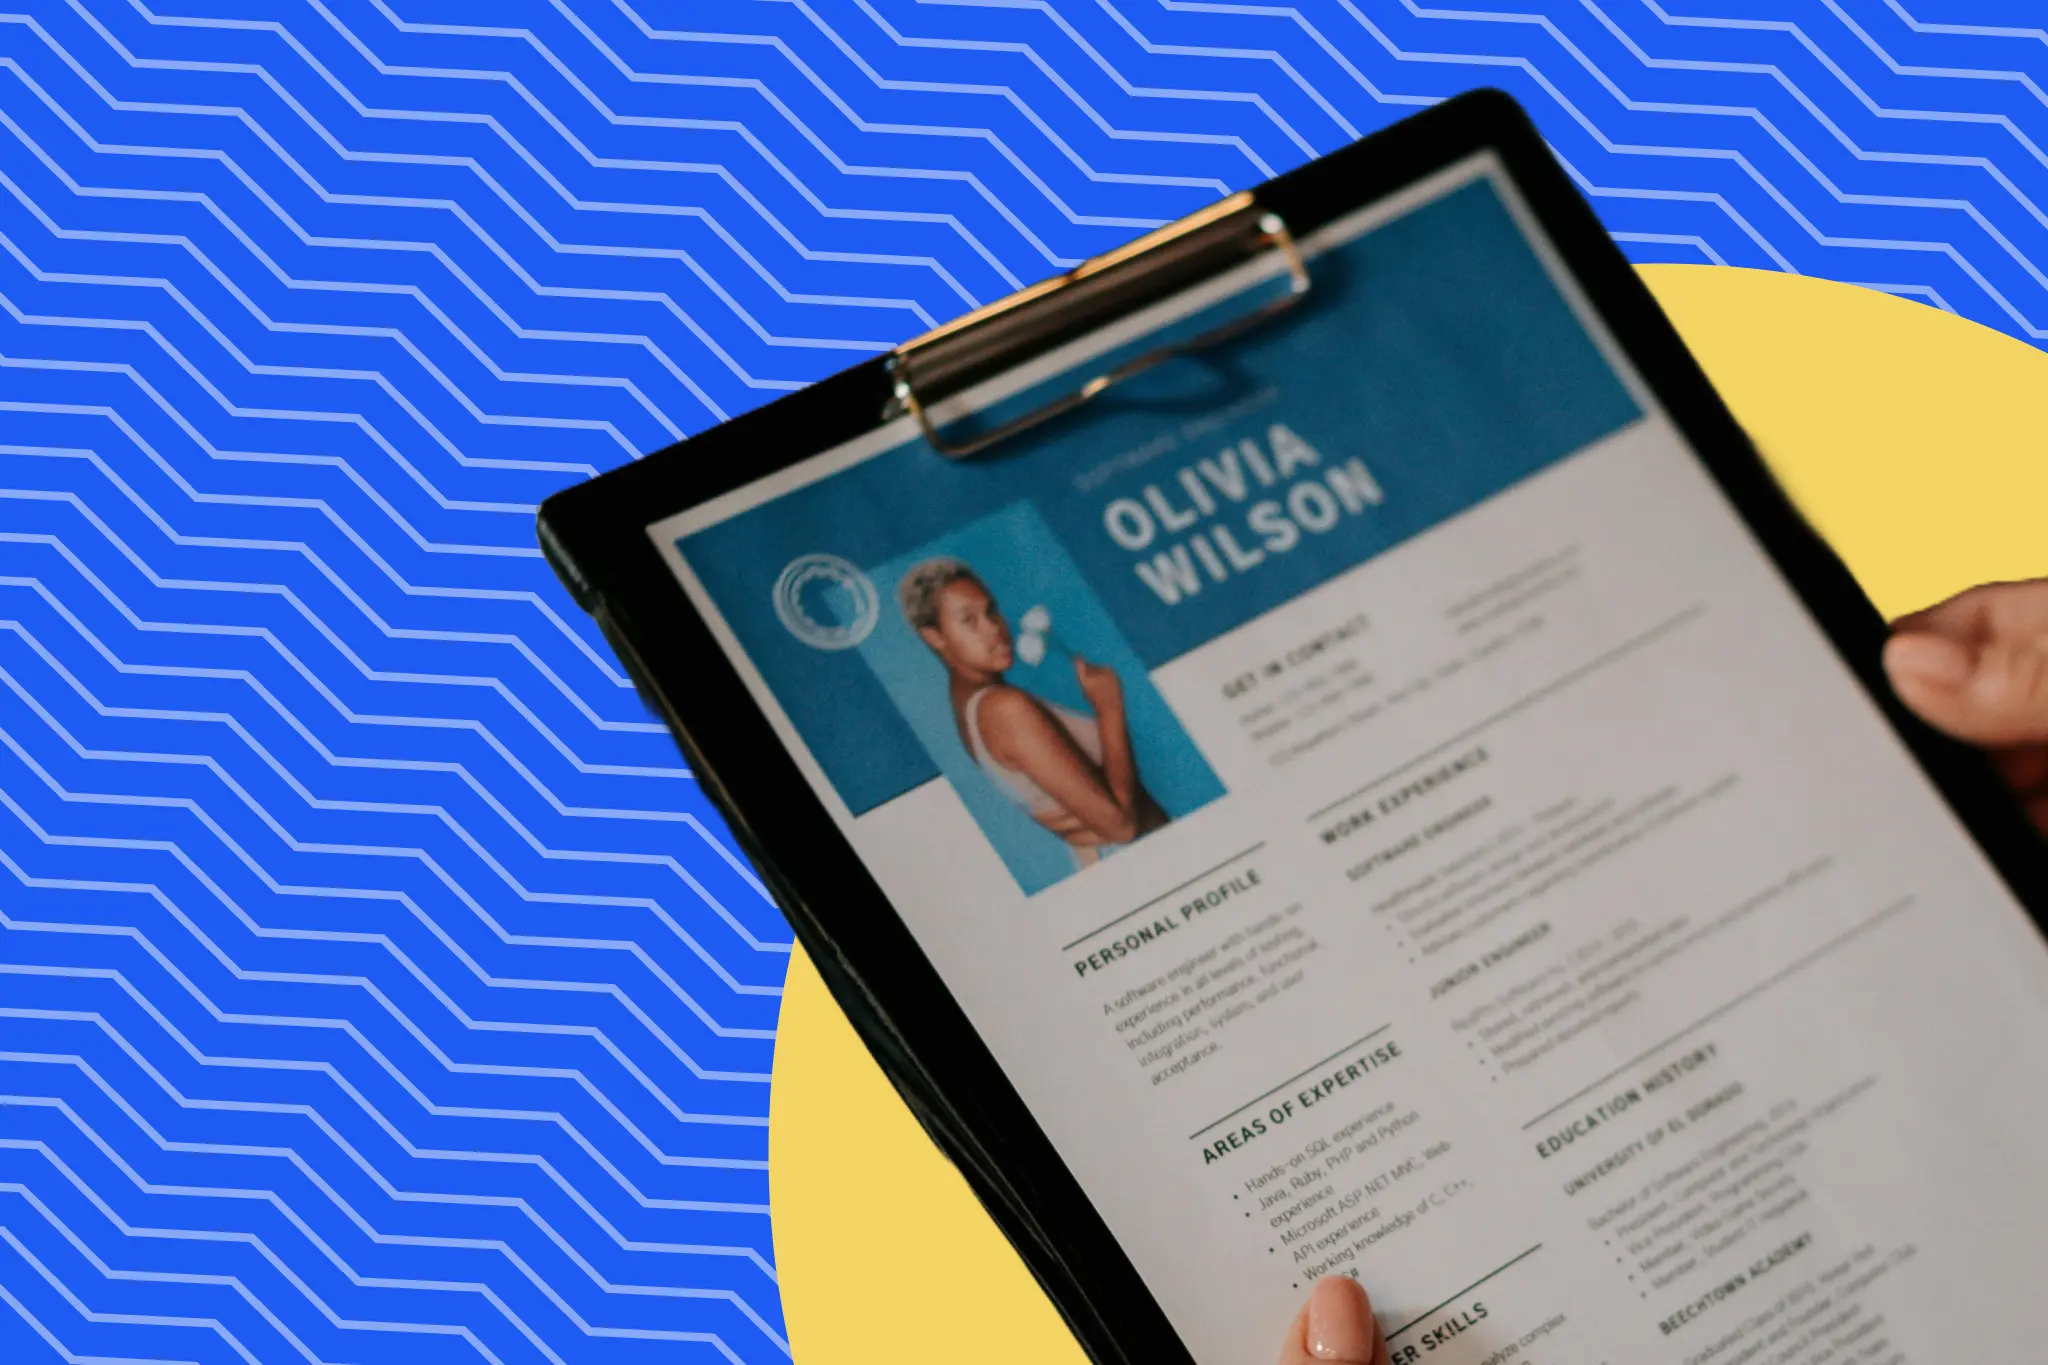 Take a look at our tips and tricks to optimize your resume for your treasurer position, and you’ll be set to get some interviews for your next position!